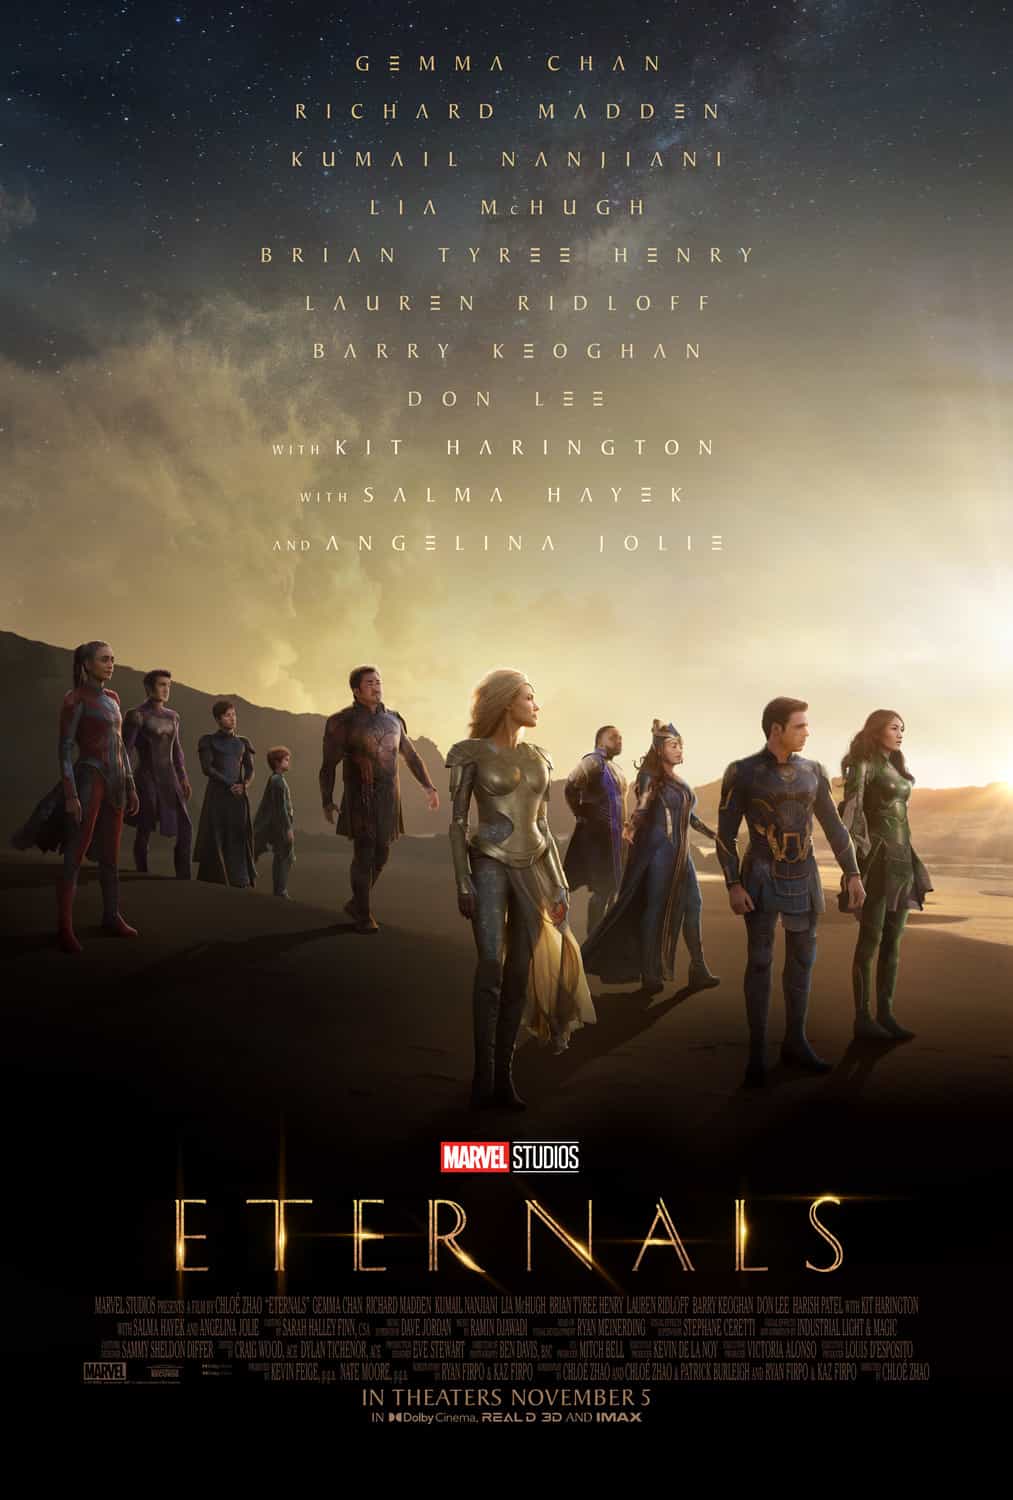 World Box Office Weekend Report 5th - 7th November 2021:  Eternals get released globally and takes the top of the box office in its debut